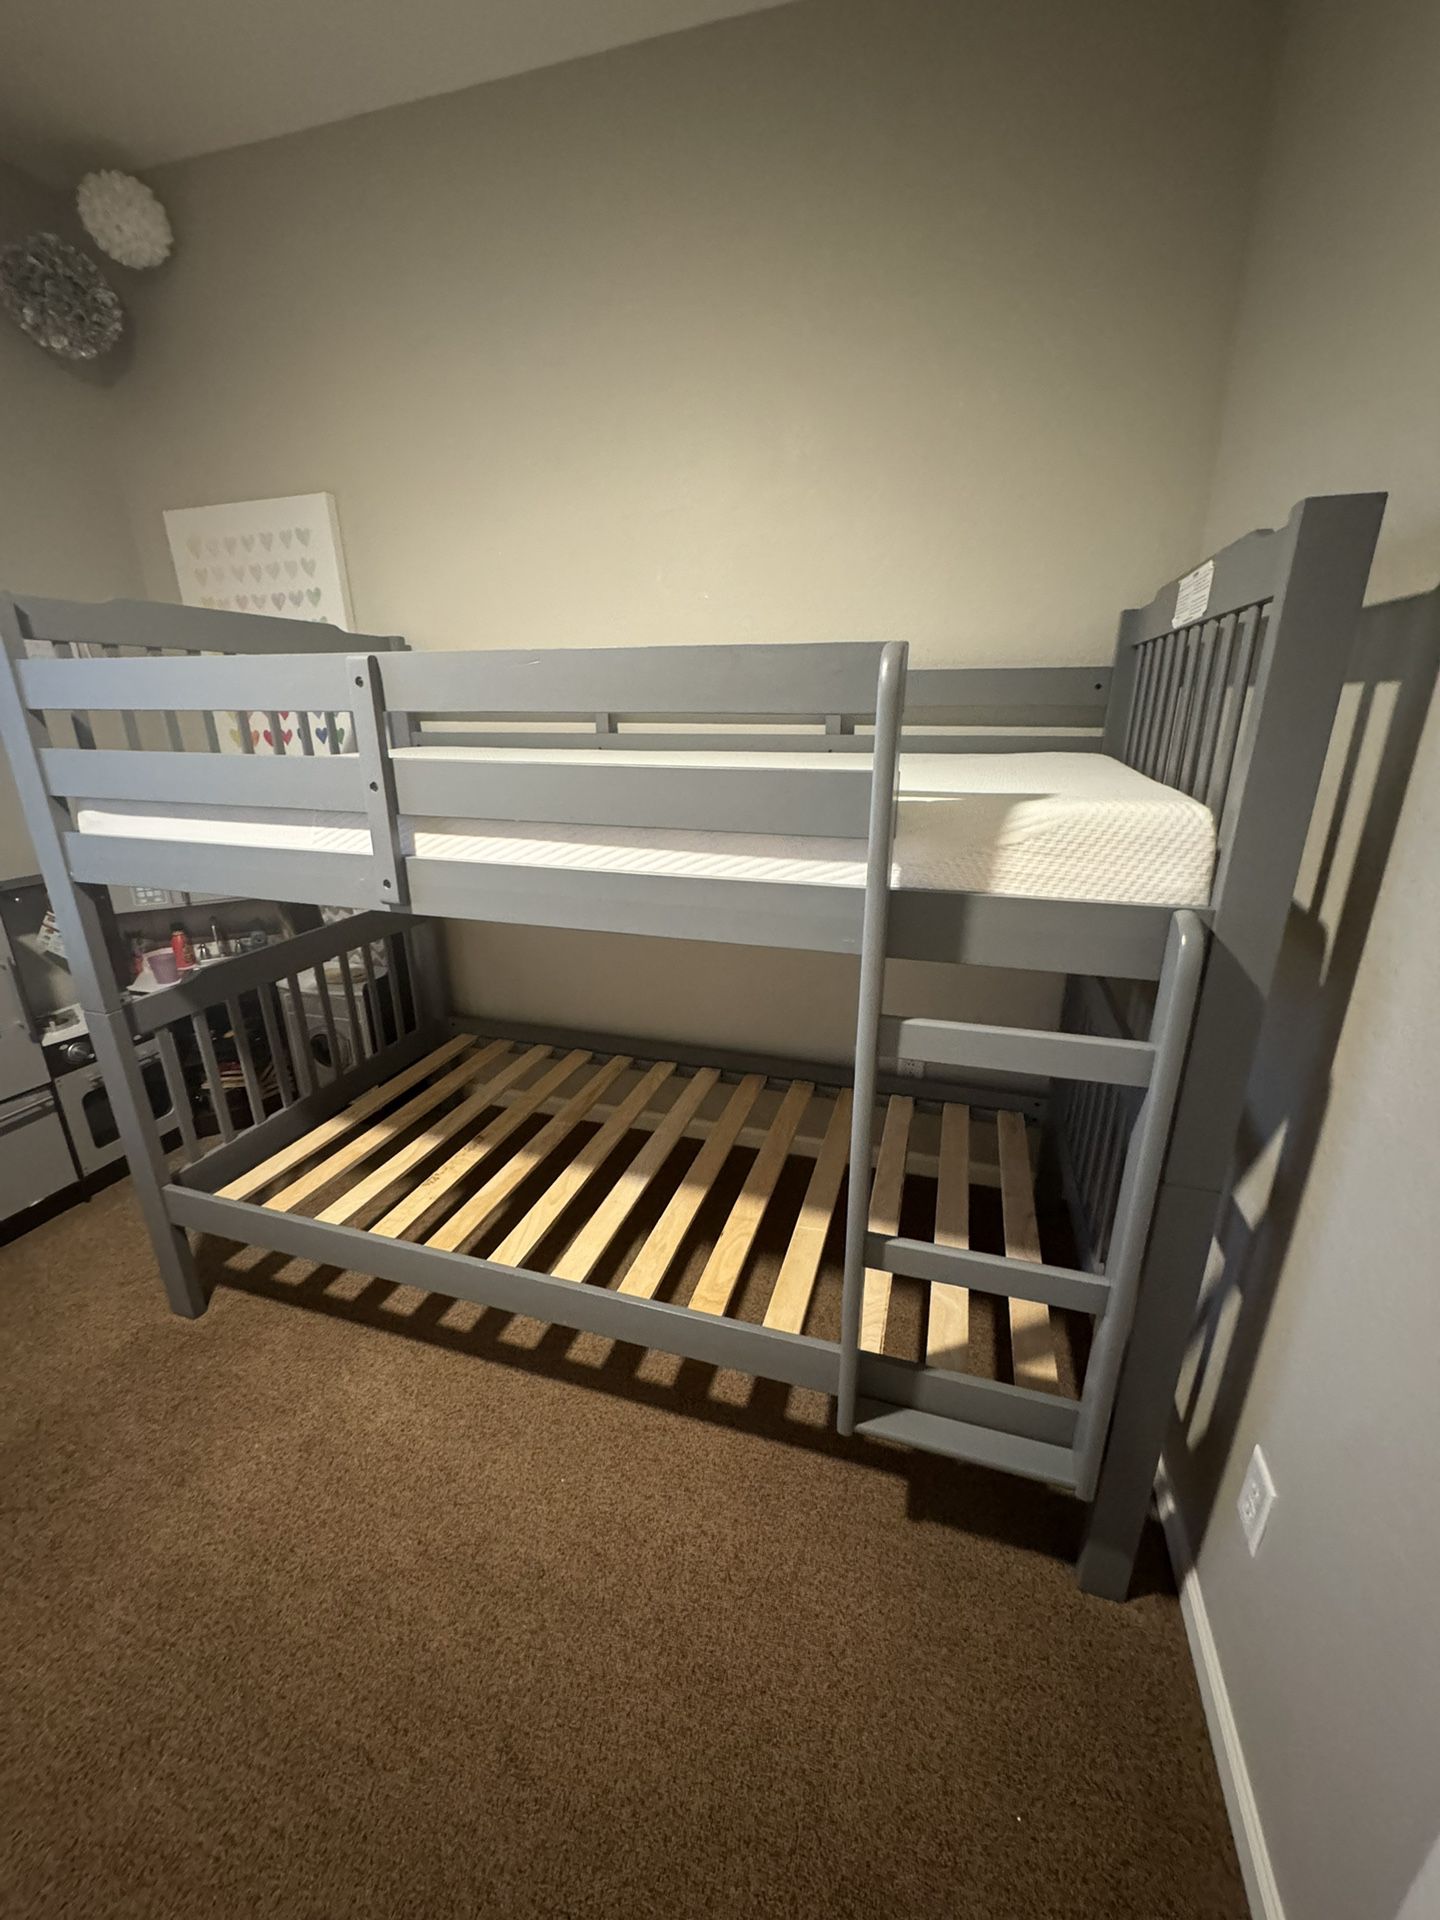 Bunk Bed Twin